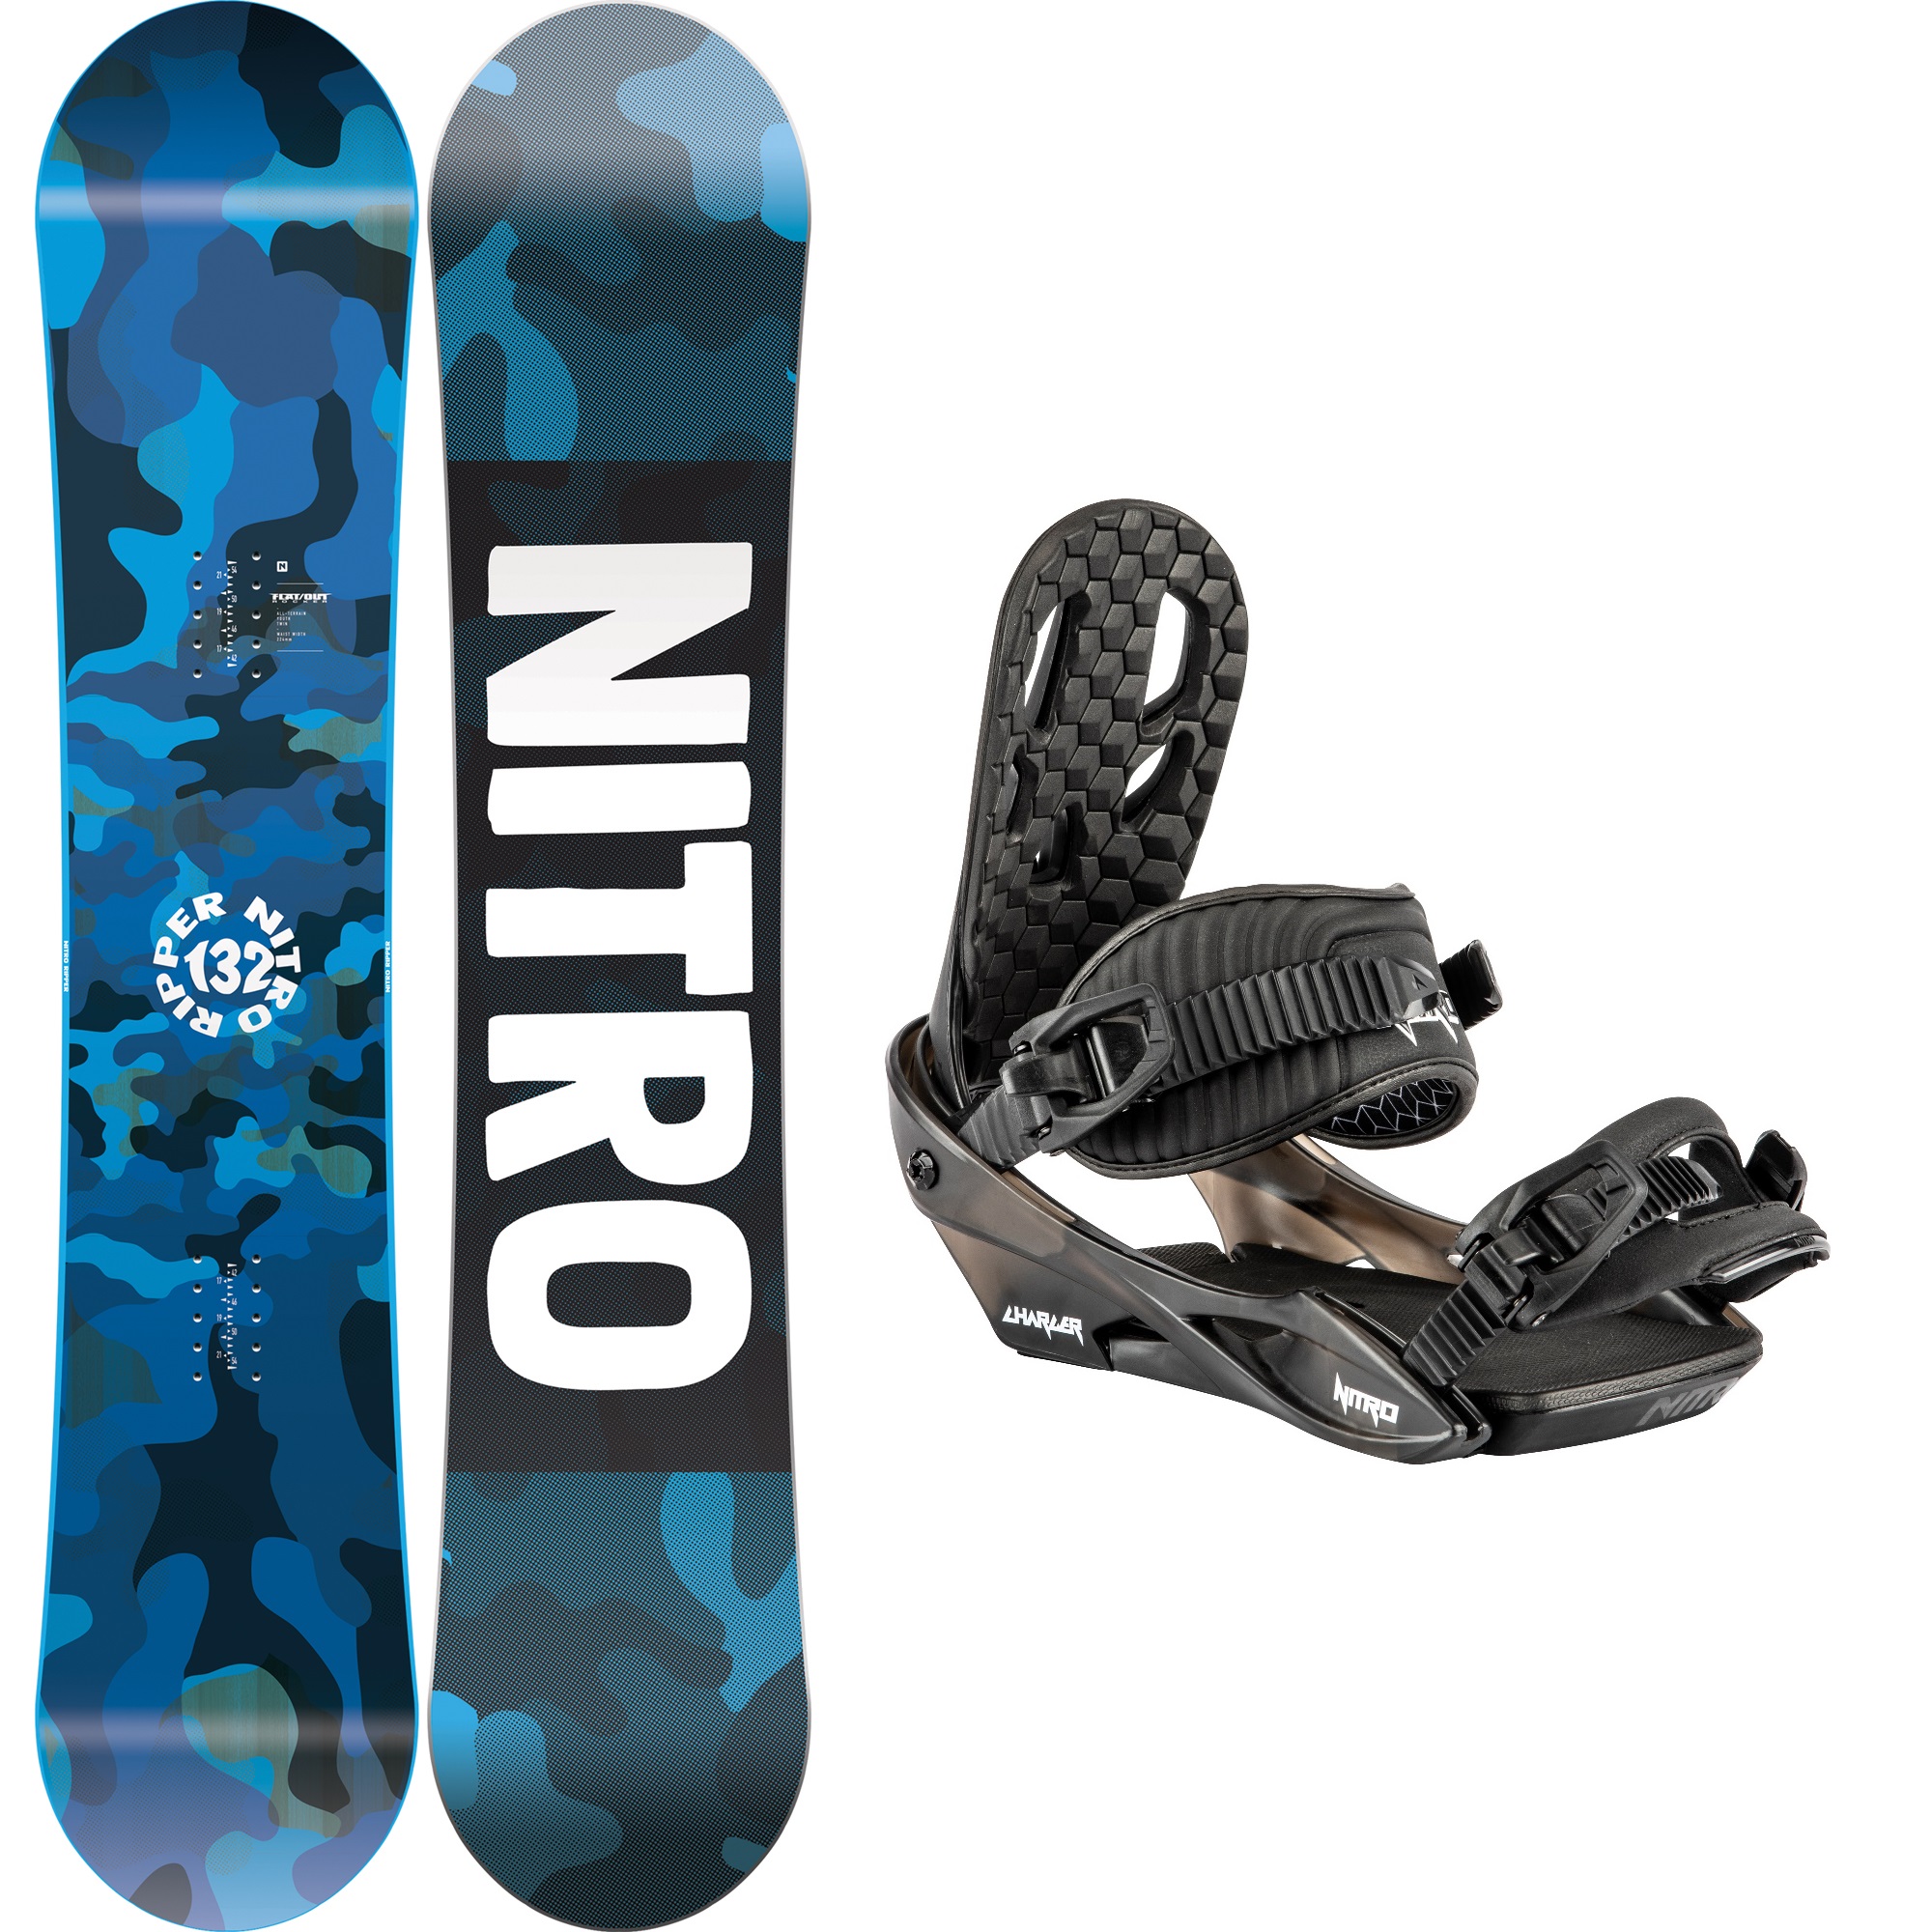 Snowboard Package -  nitro RIPPER YOUTH + CHARGER